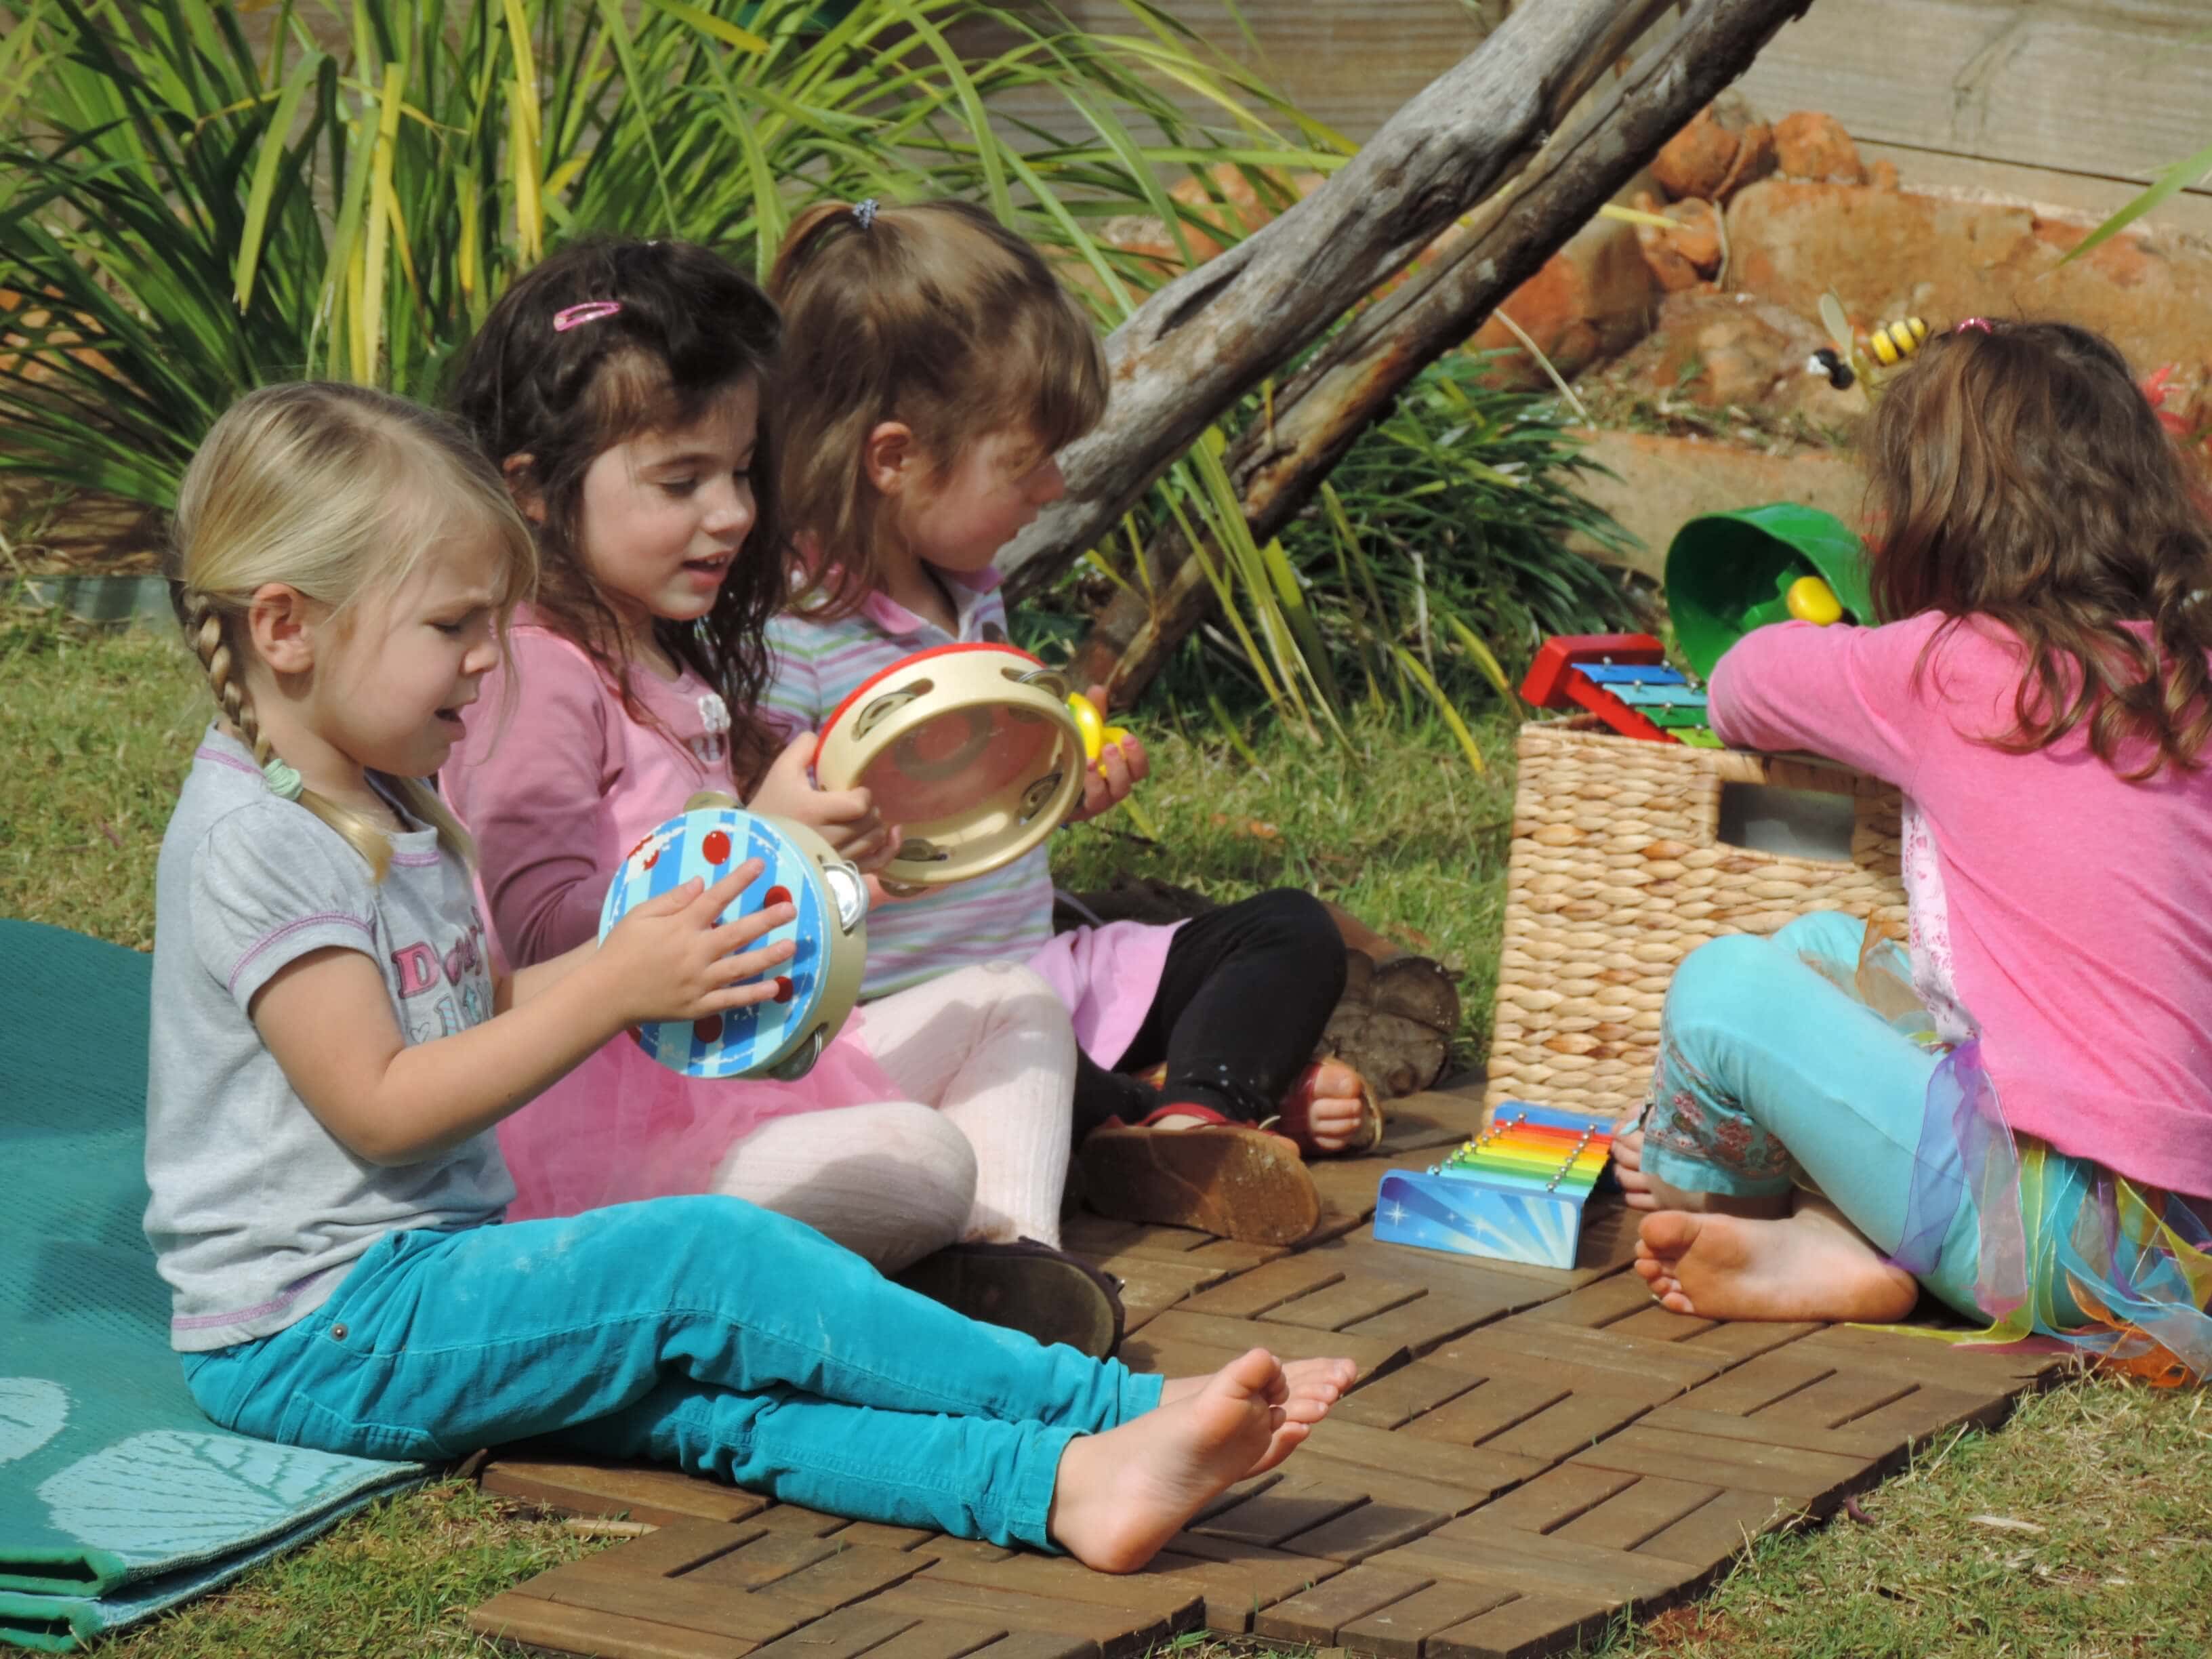 group of preschool children playing musical instruments together